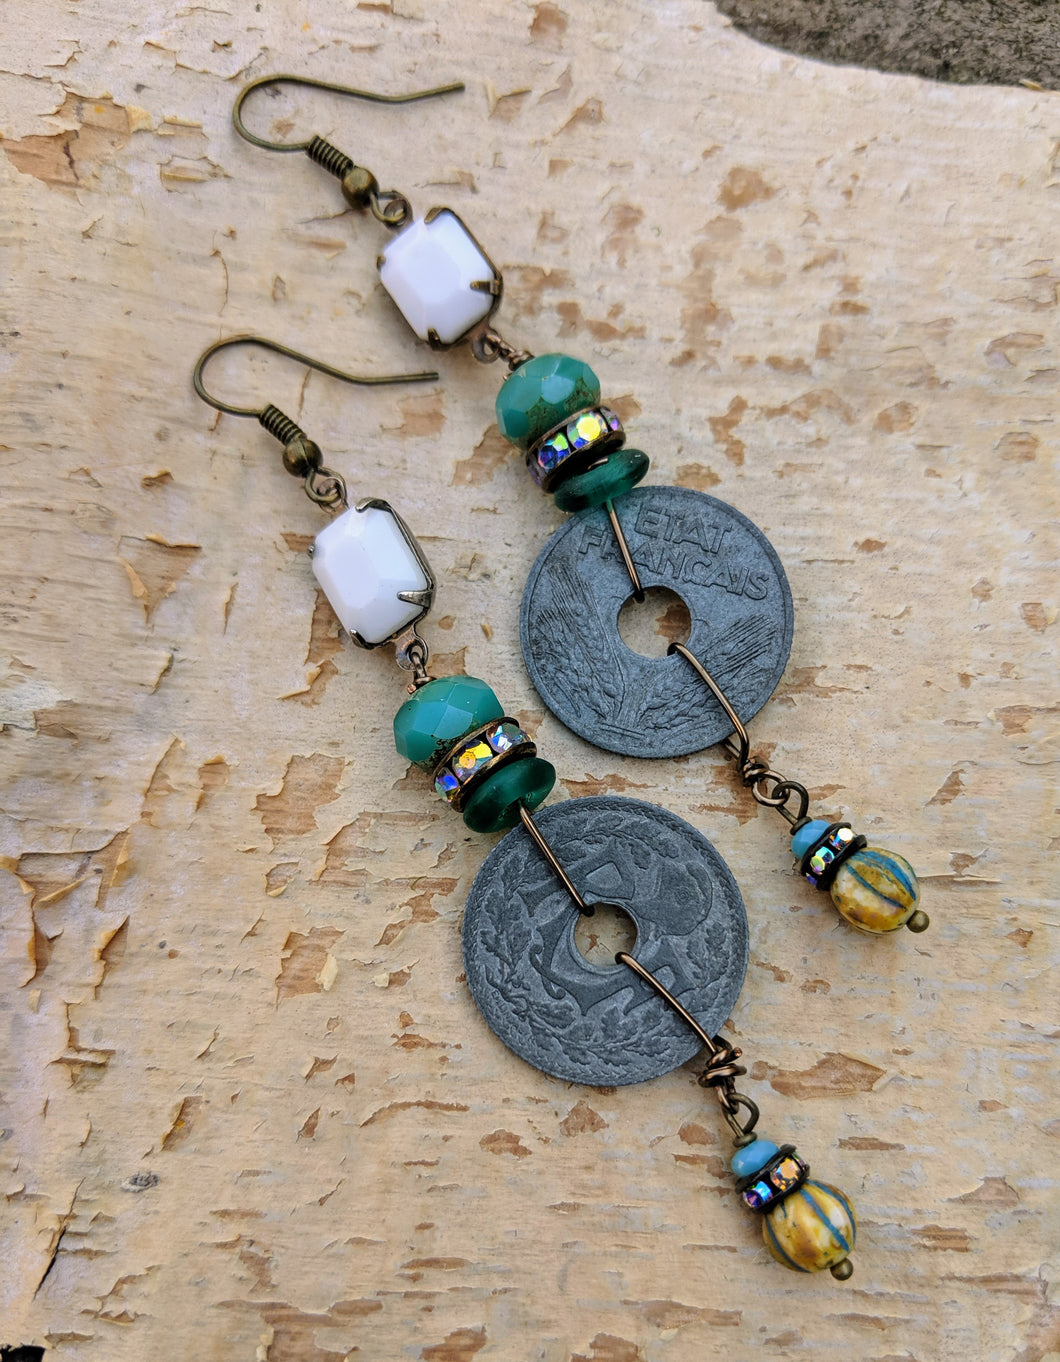 Vintage French Coin Assemblage Earrings - Minxes' Trinkets